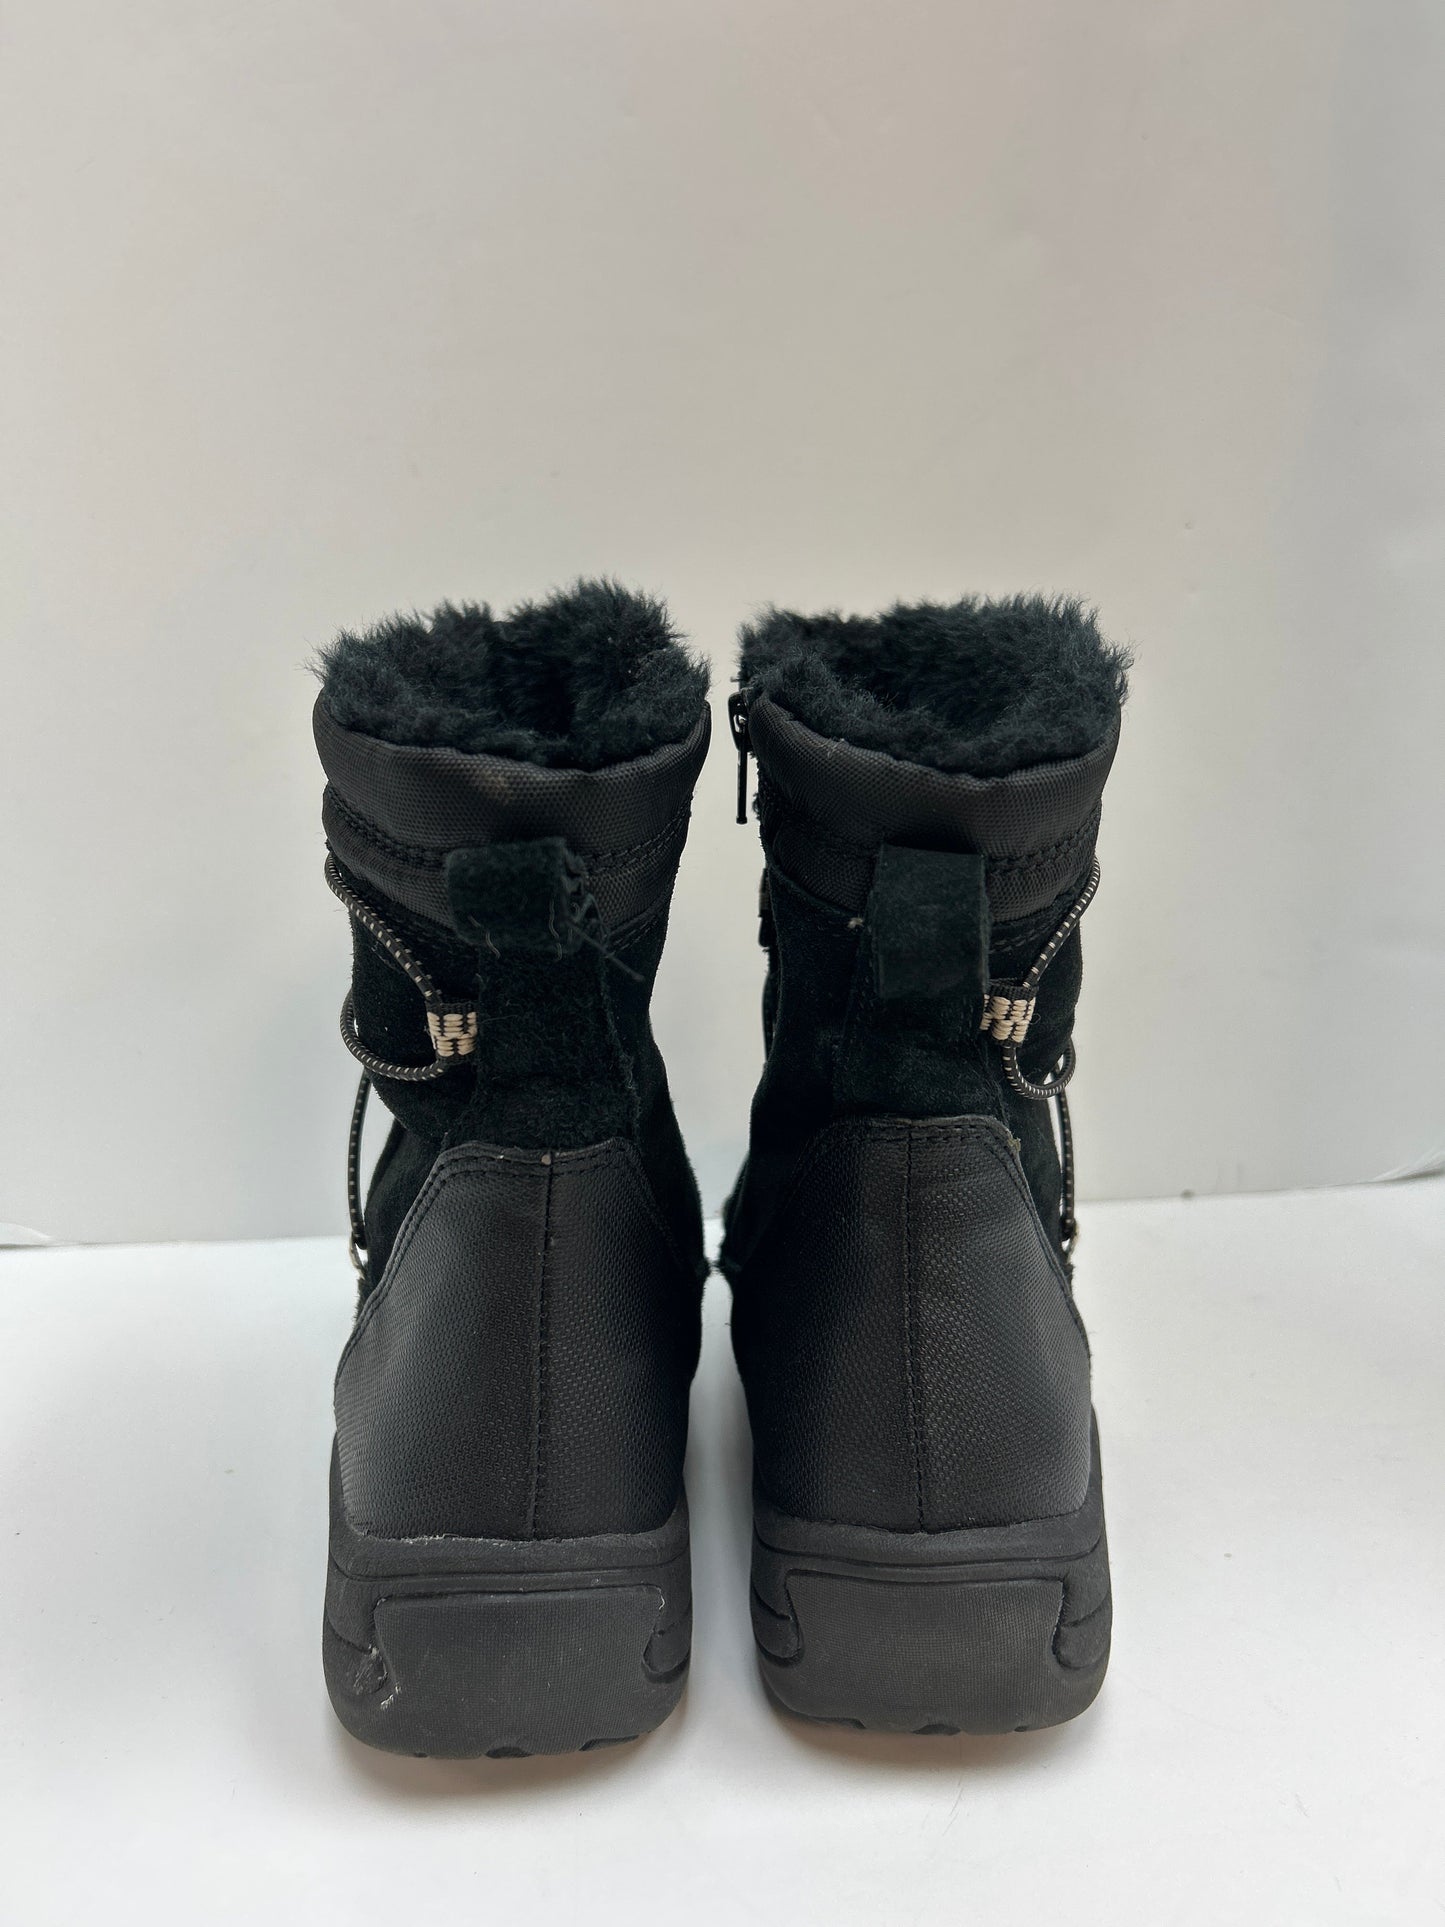 Boots Snow By Bare Traps  Size: 9.5